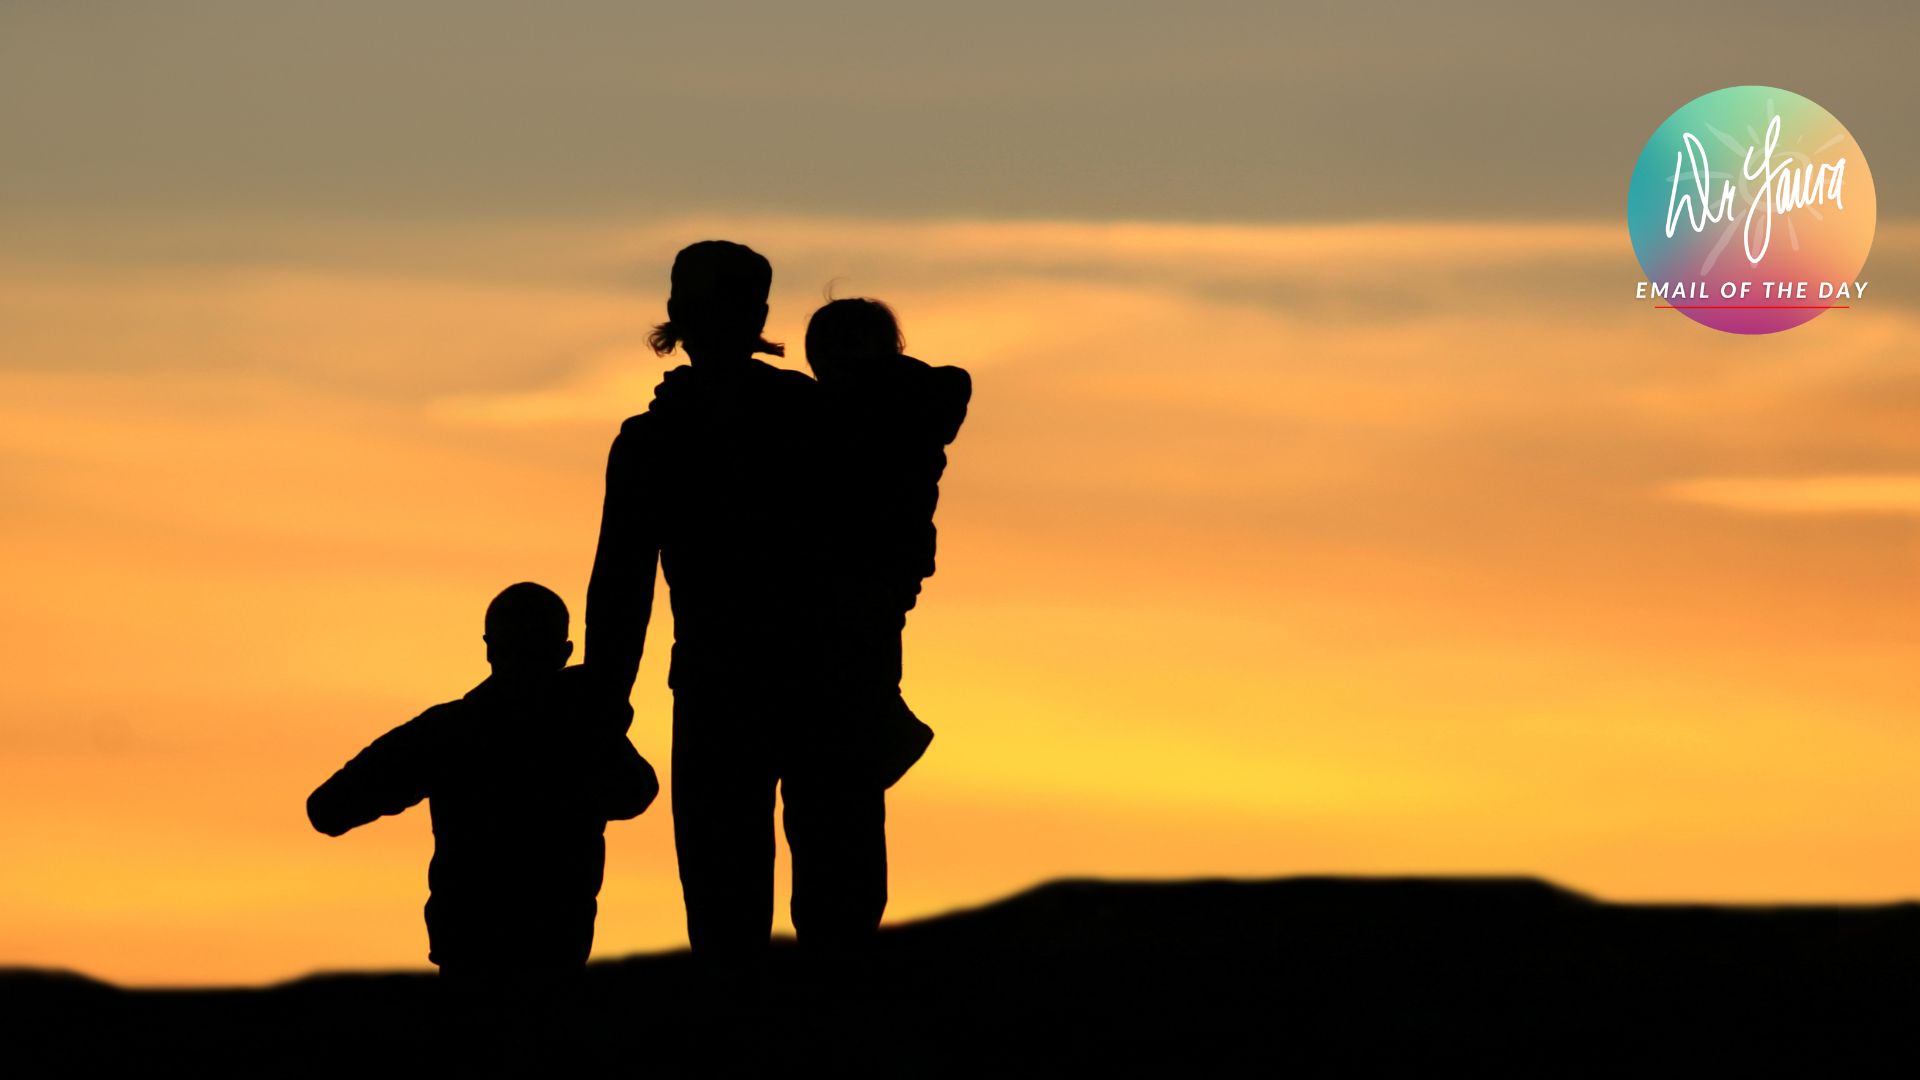 Silhouette of woman holding young child in her arms while holding hands with a small child outside